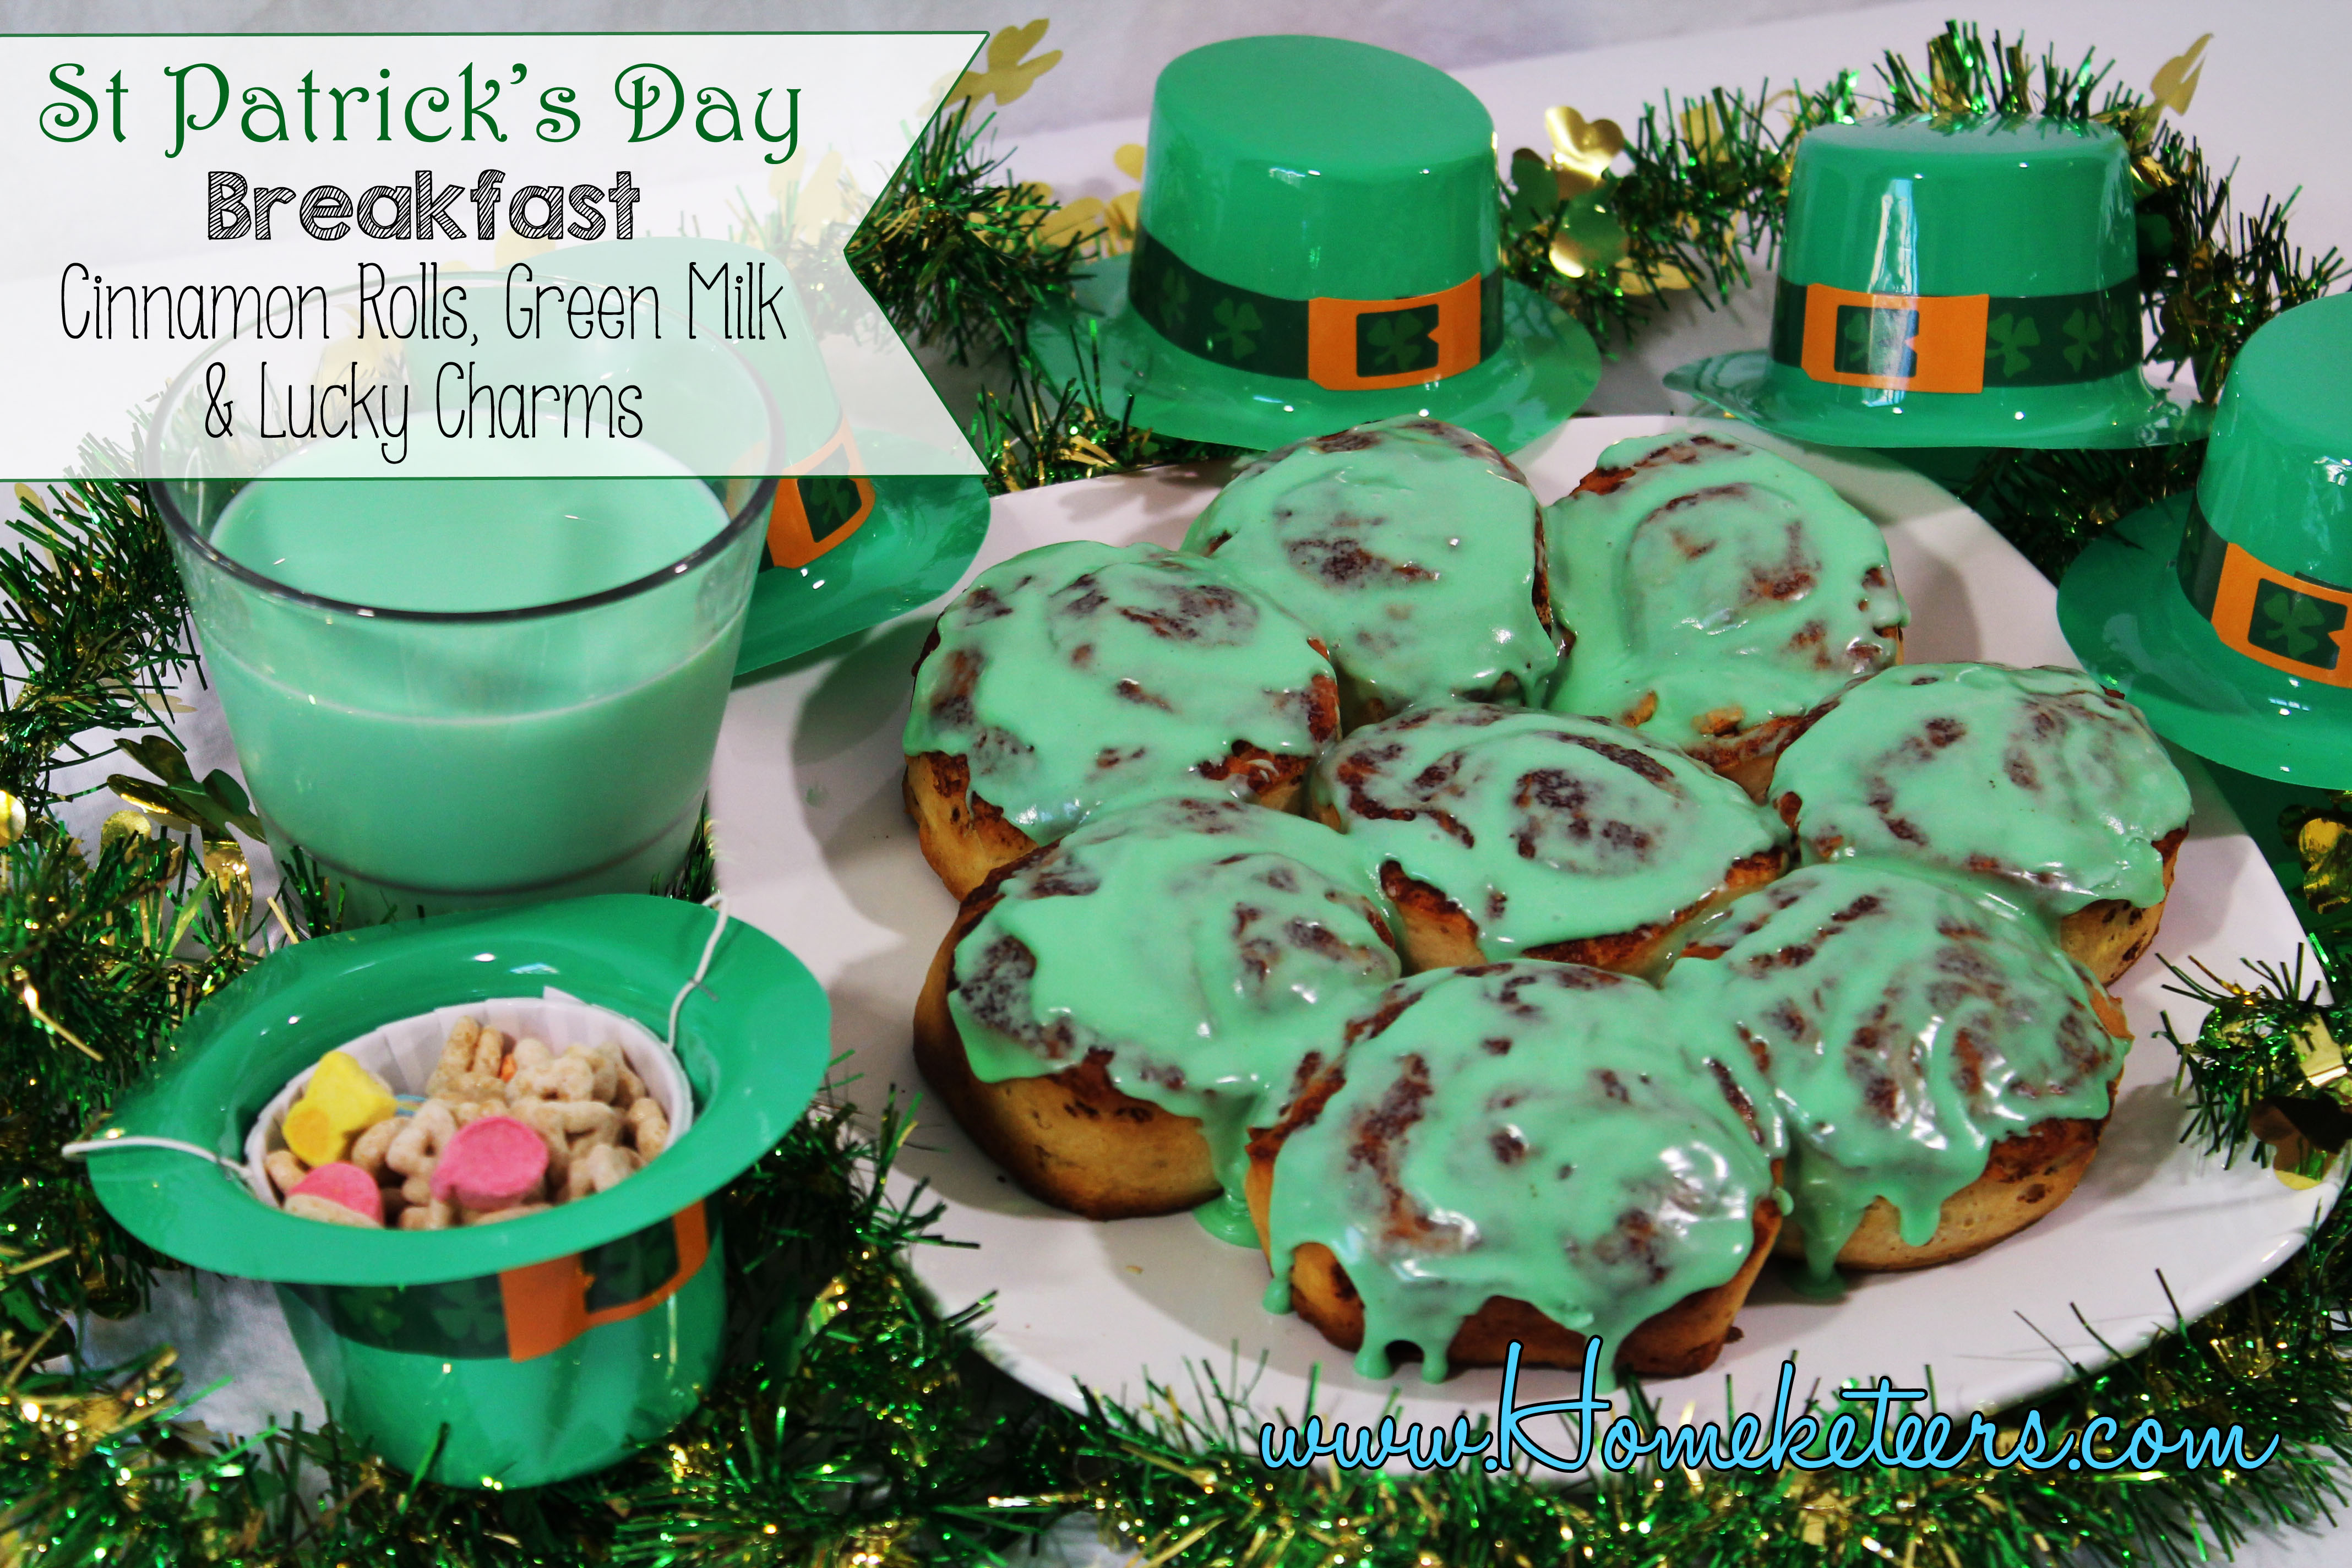 St Patrick’s Day Breakfast and Snacks